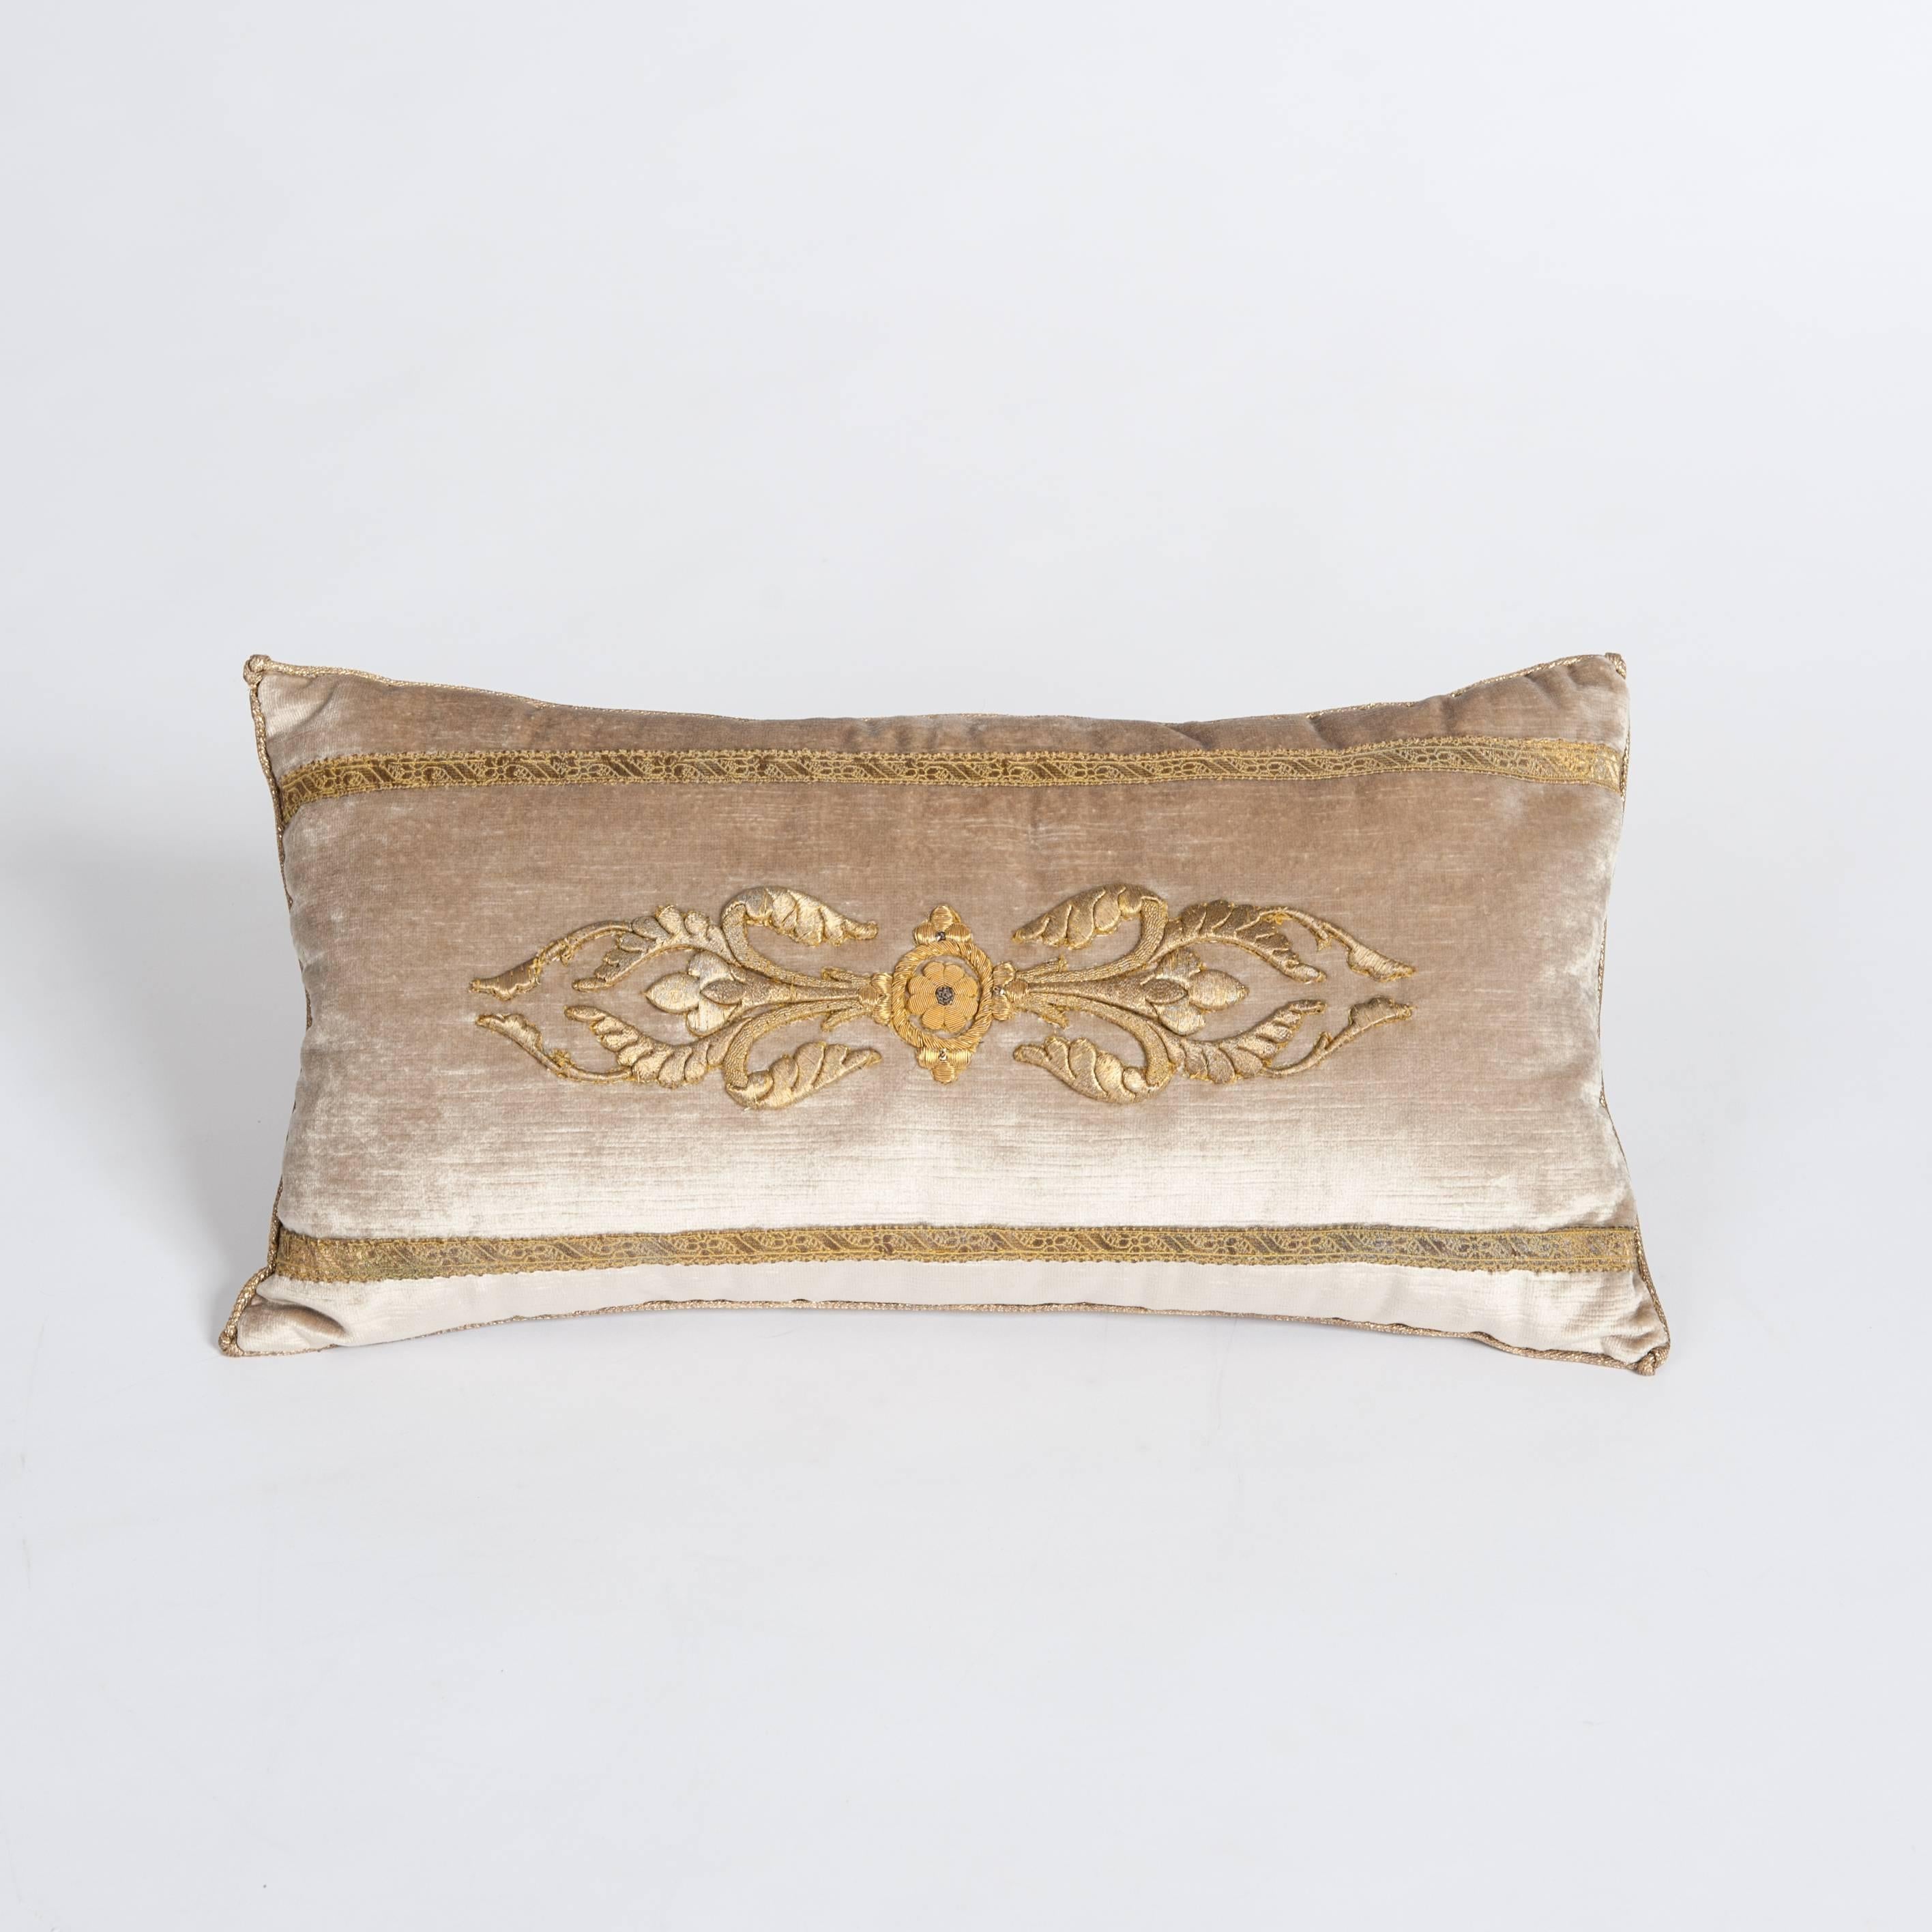 Louis XVI Pair of Champagne-Beige Colored Velvet Pillows with Antique Metallic Embroidery